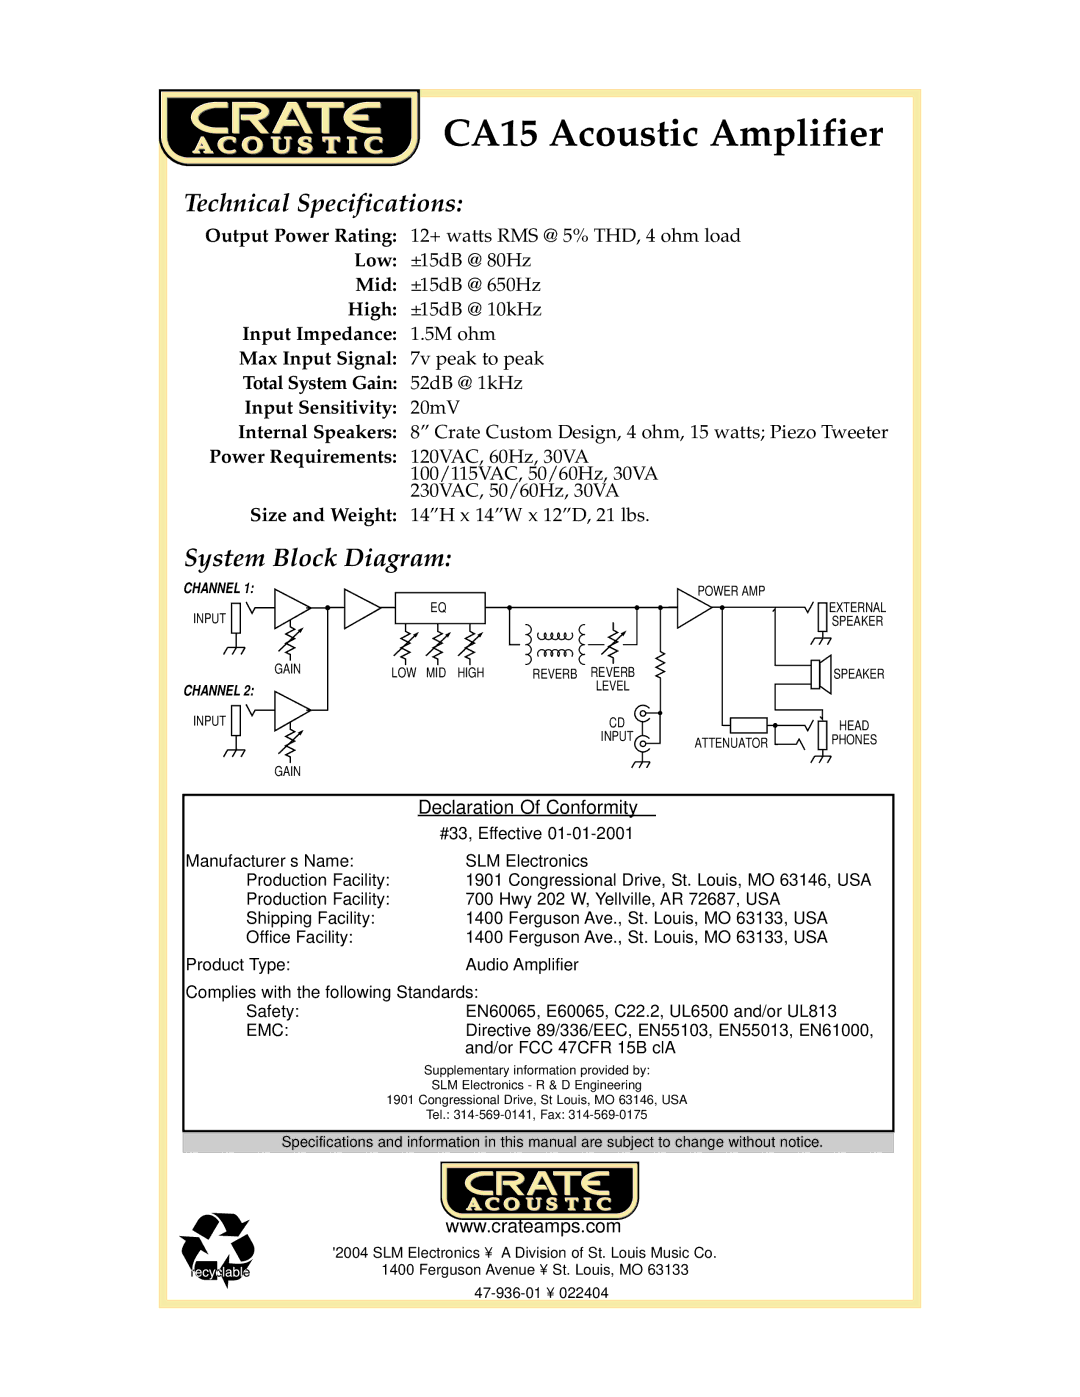 Crate Amplifiers CA15 manual Technical Specifications, System Block Diagram, Emc 